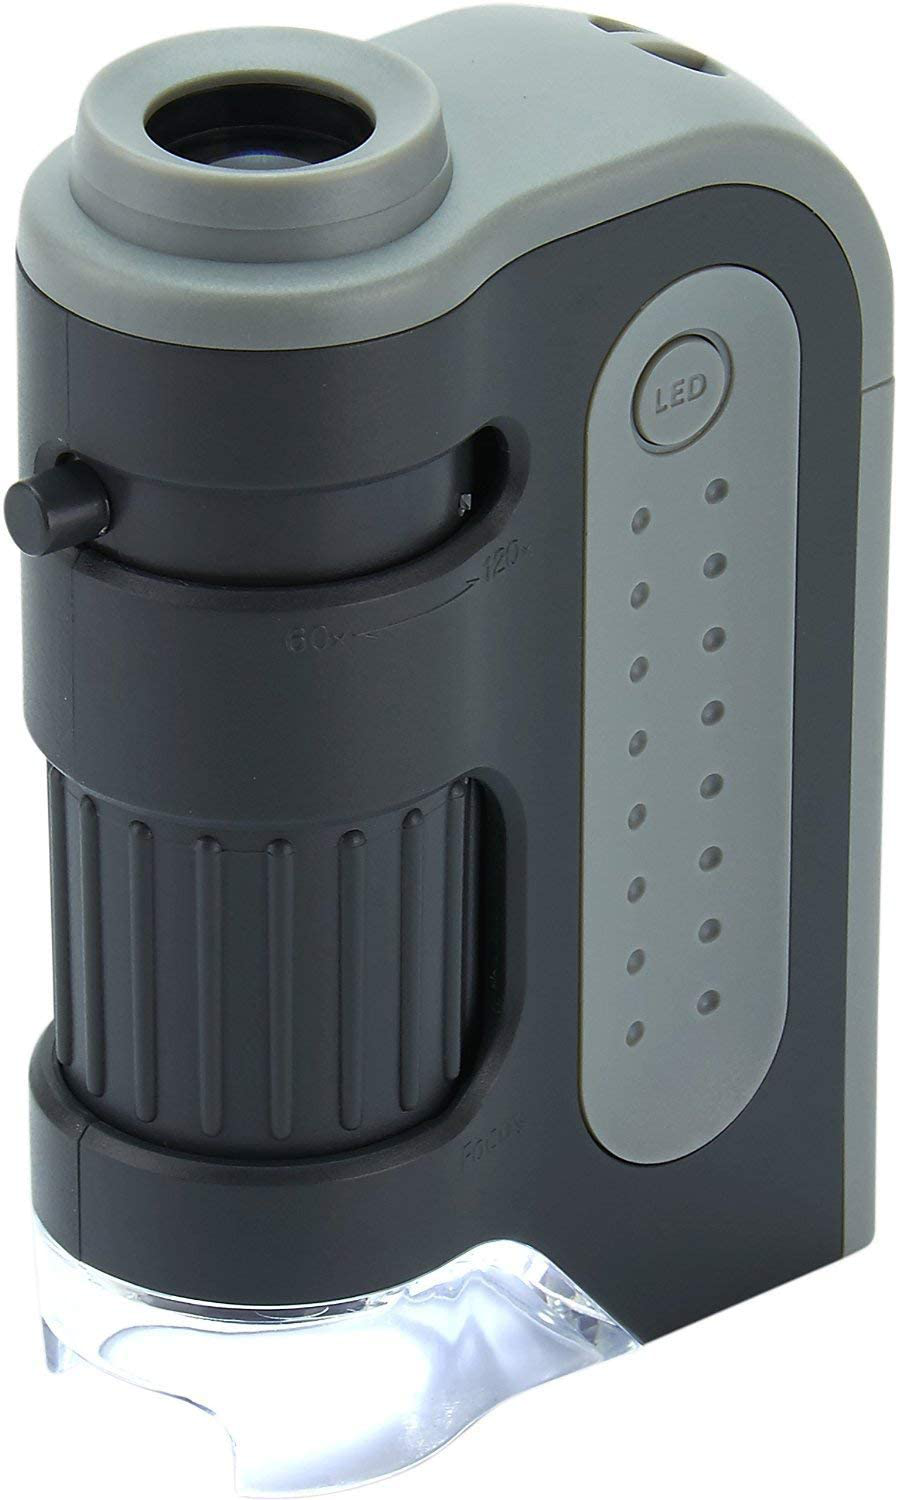 Carson MicroBrite Plus 60x-120x LED Lighted Zoom Pocket Microscope with Aspheric Lens System